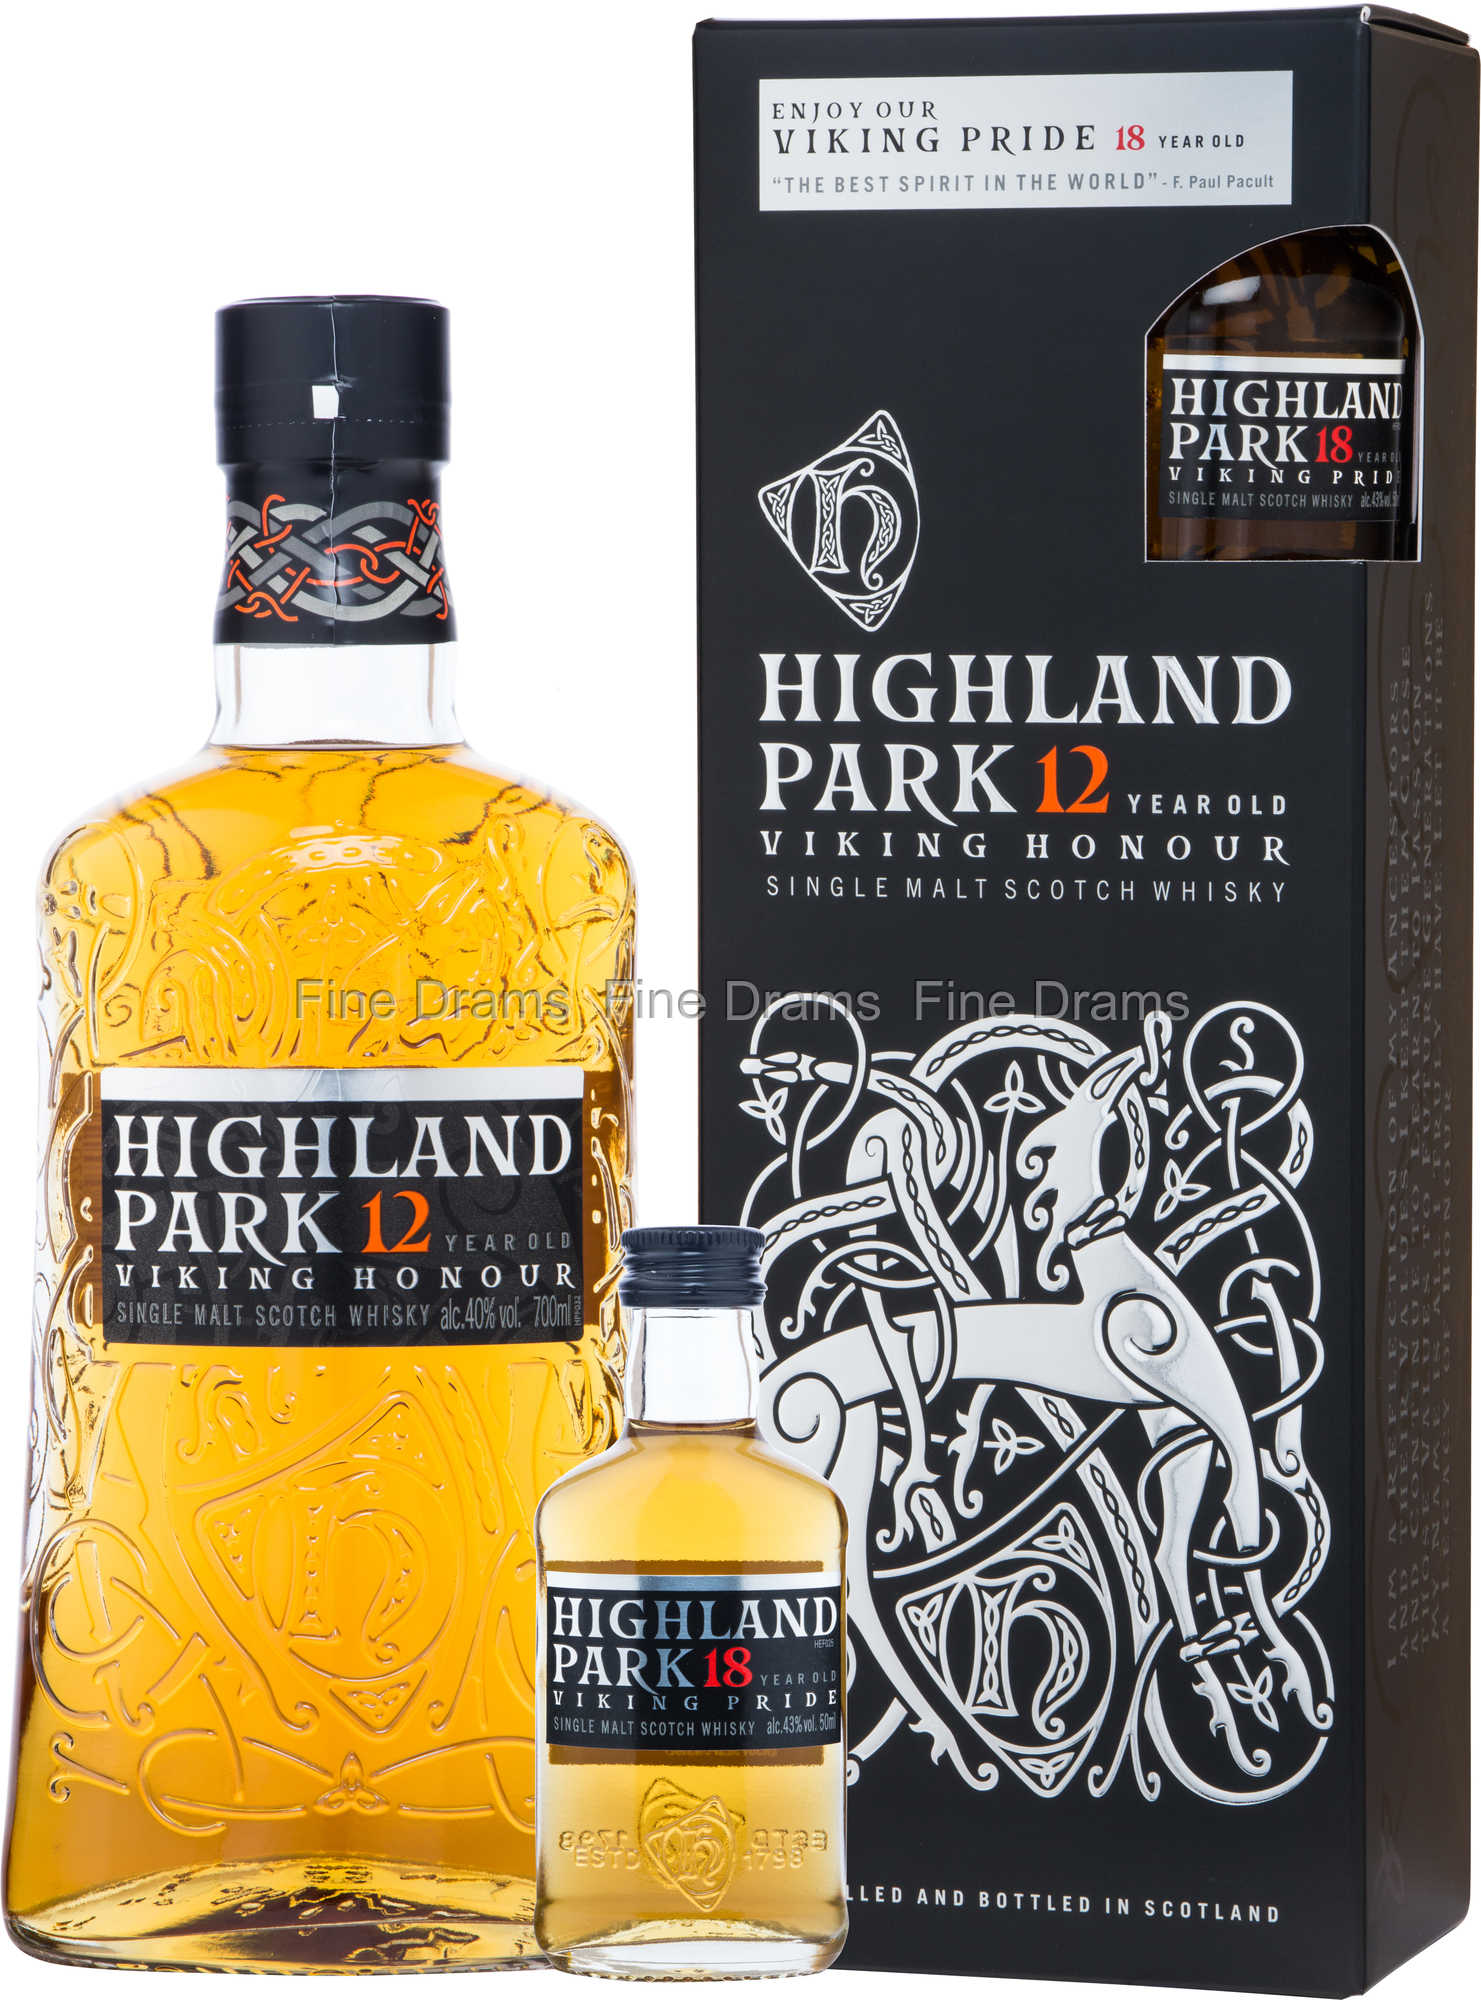 Pride Whisky Park Year Highland Old Year - Viking Viking with Honour Miniature Old 18 12